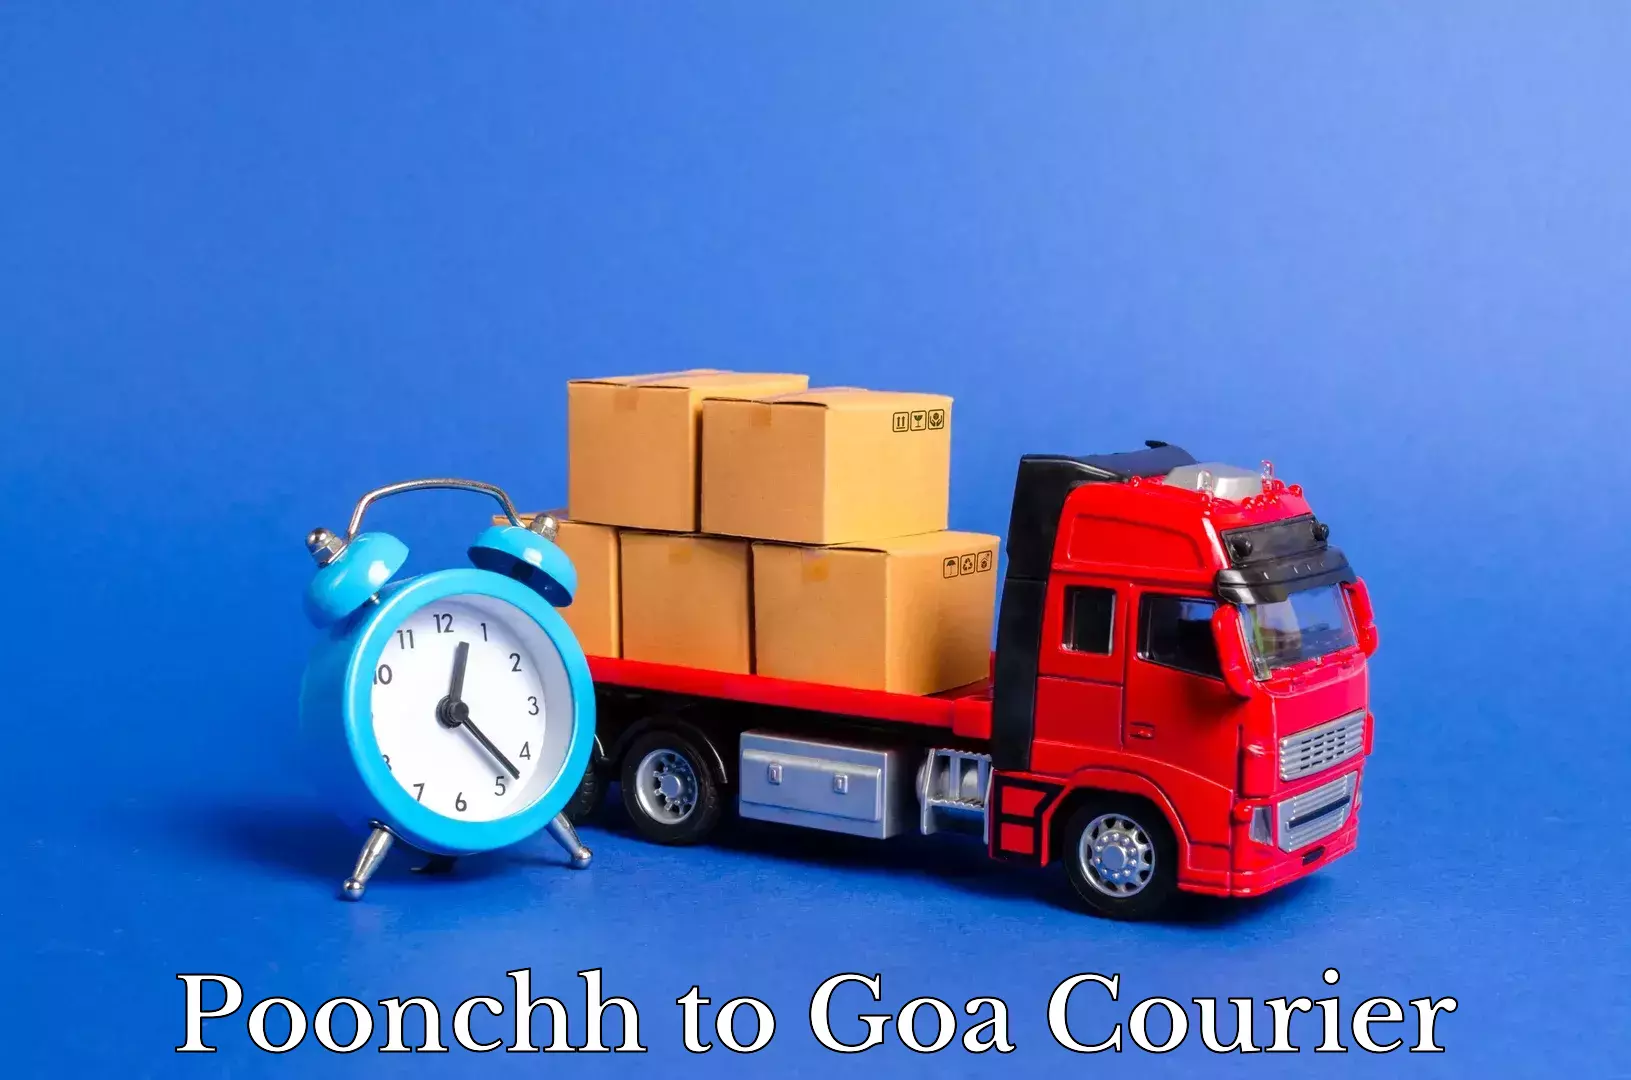 Furniture delivery service Poonchh to Goa